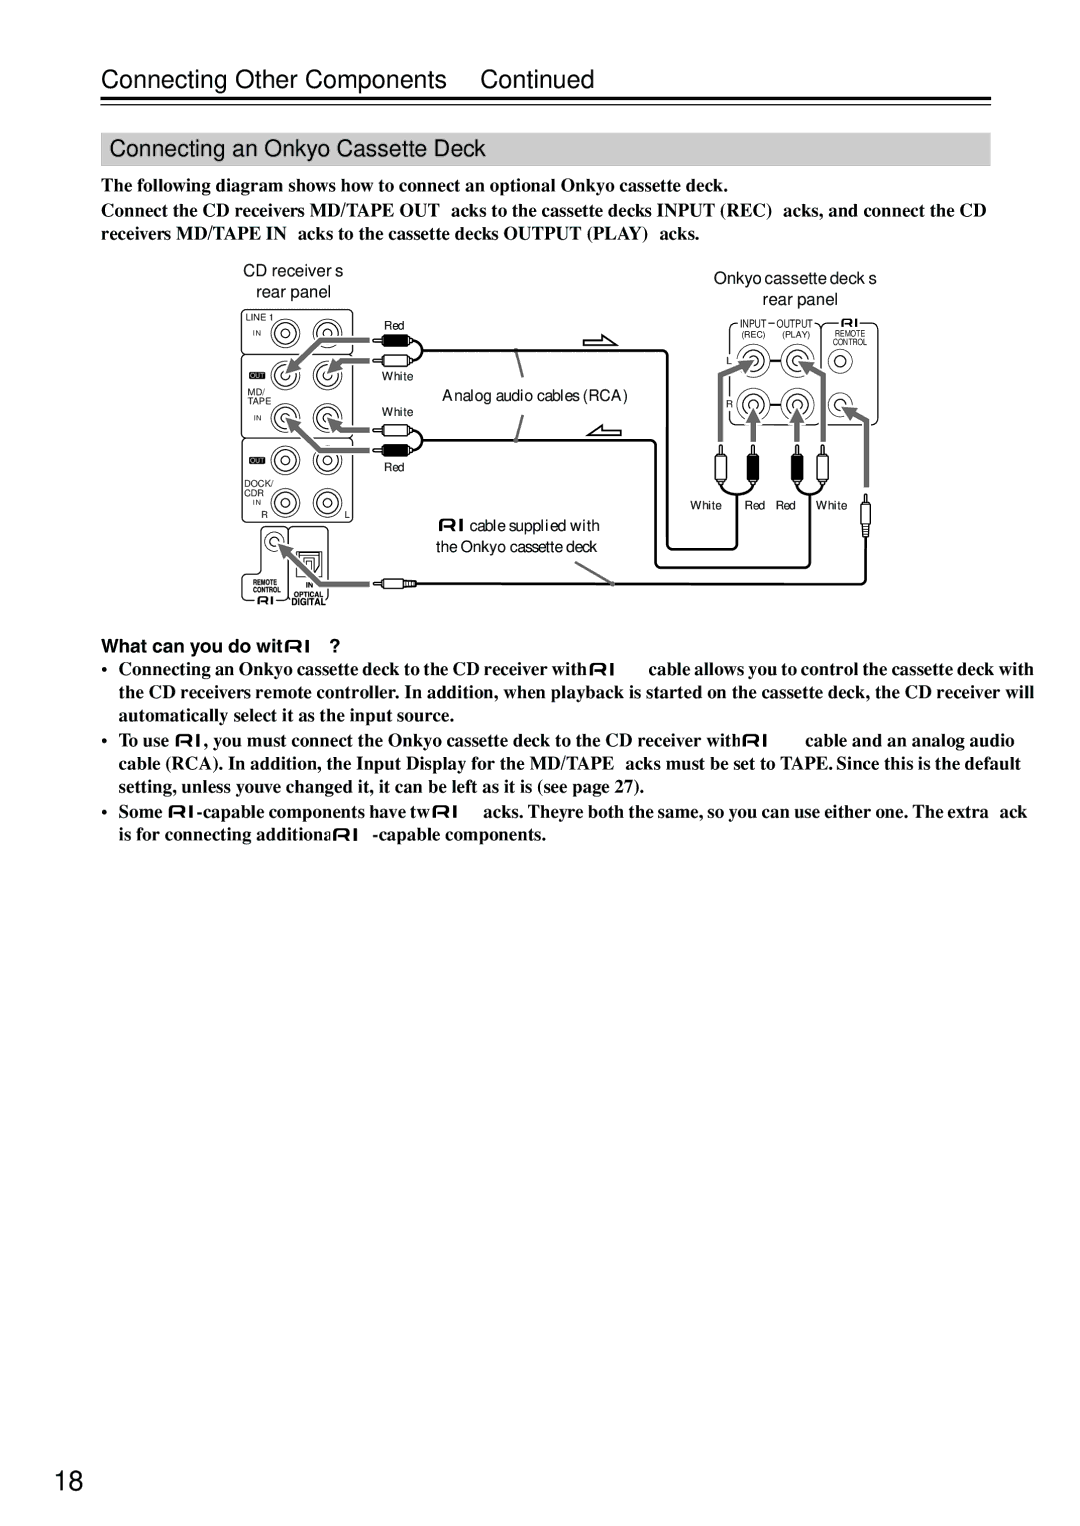 Onkyo CR-715DAB instruction manual Connecting Other Components, Connecting an Onkyo Cassette Deck 